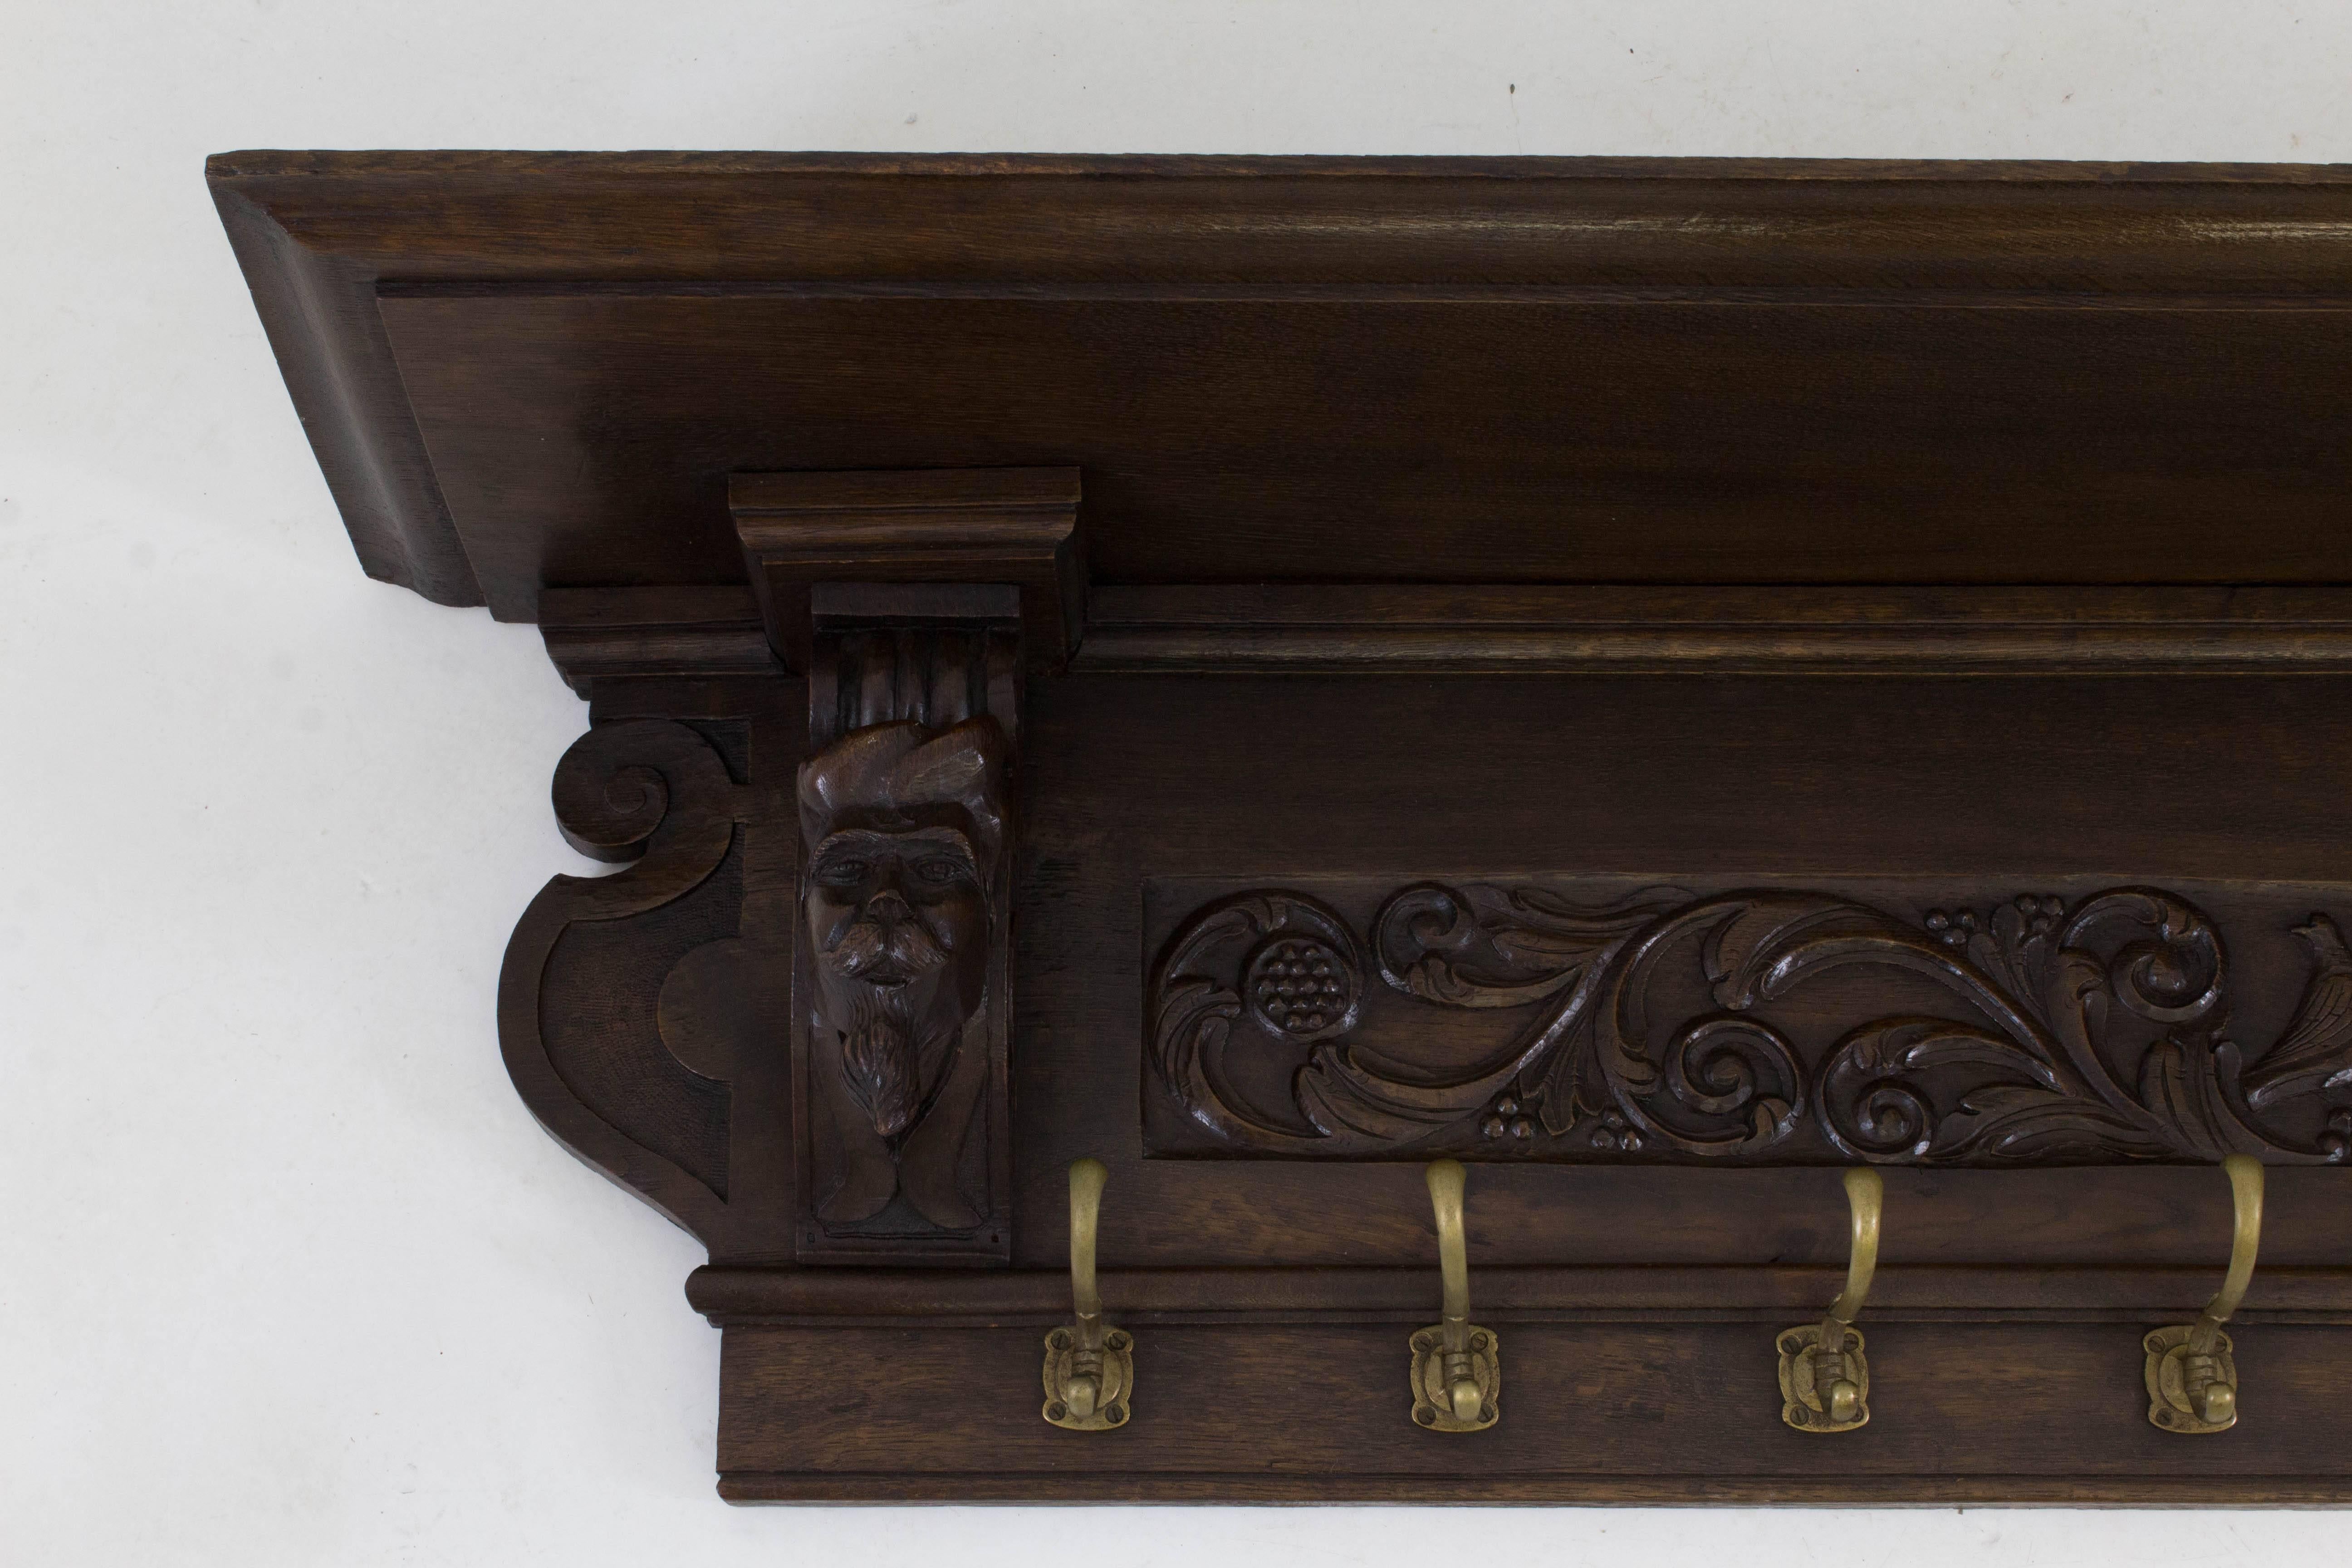 Large and rare Renaissance Revival carved coat rack, 1890s.
Solid oak with nicely carved male heads.
Eight original brass hooks.
In good original condition with minor wear consistent with age and use,
preserving a beautiful patina.